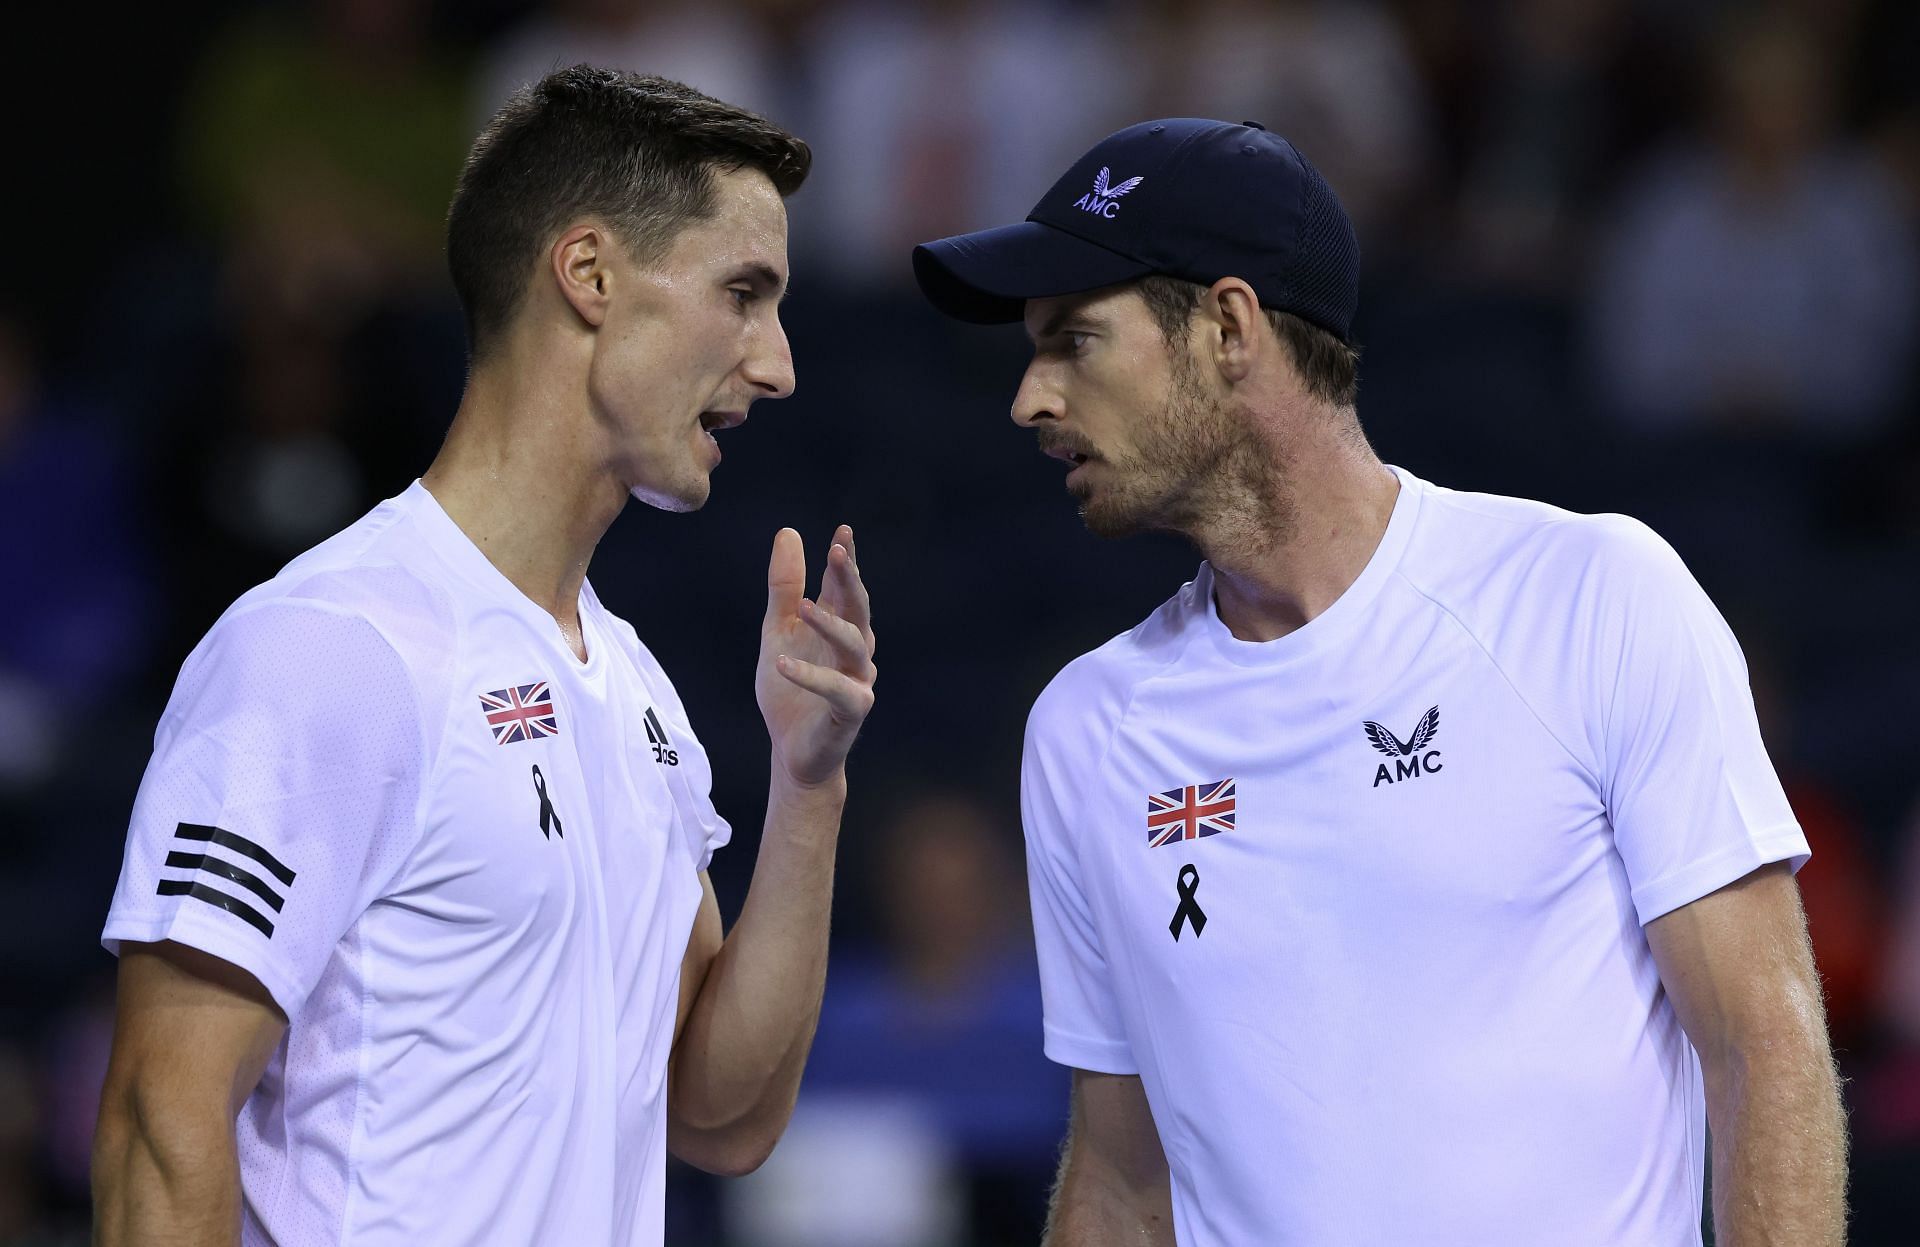 Joe Salisbury (L) and Andy Murray pictured during the Davis Cup Group D match between USA and UK